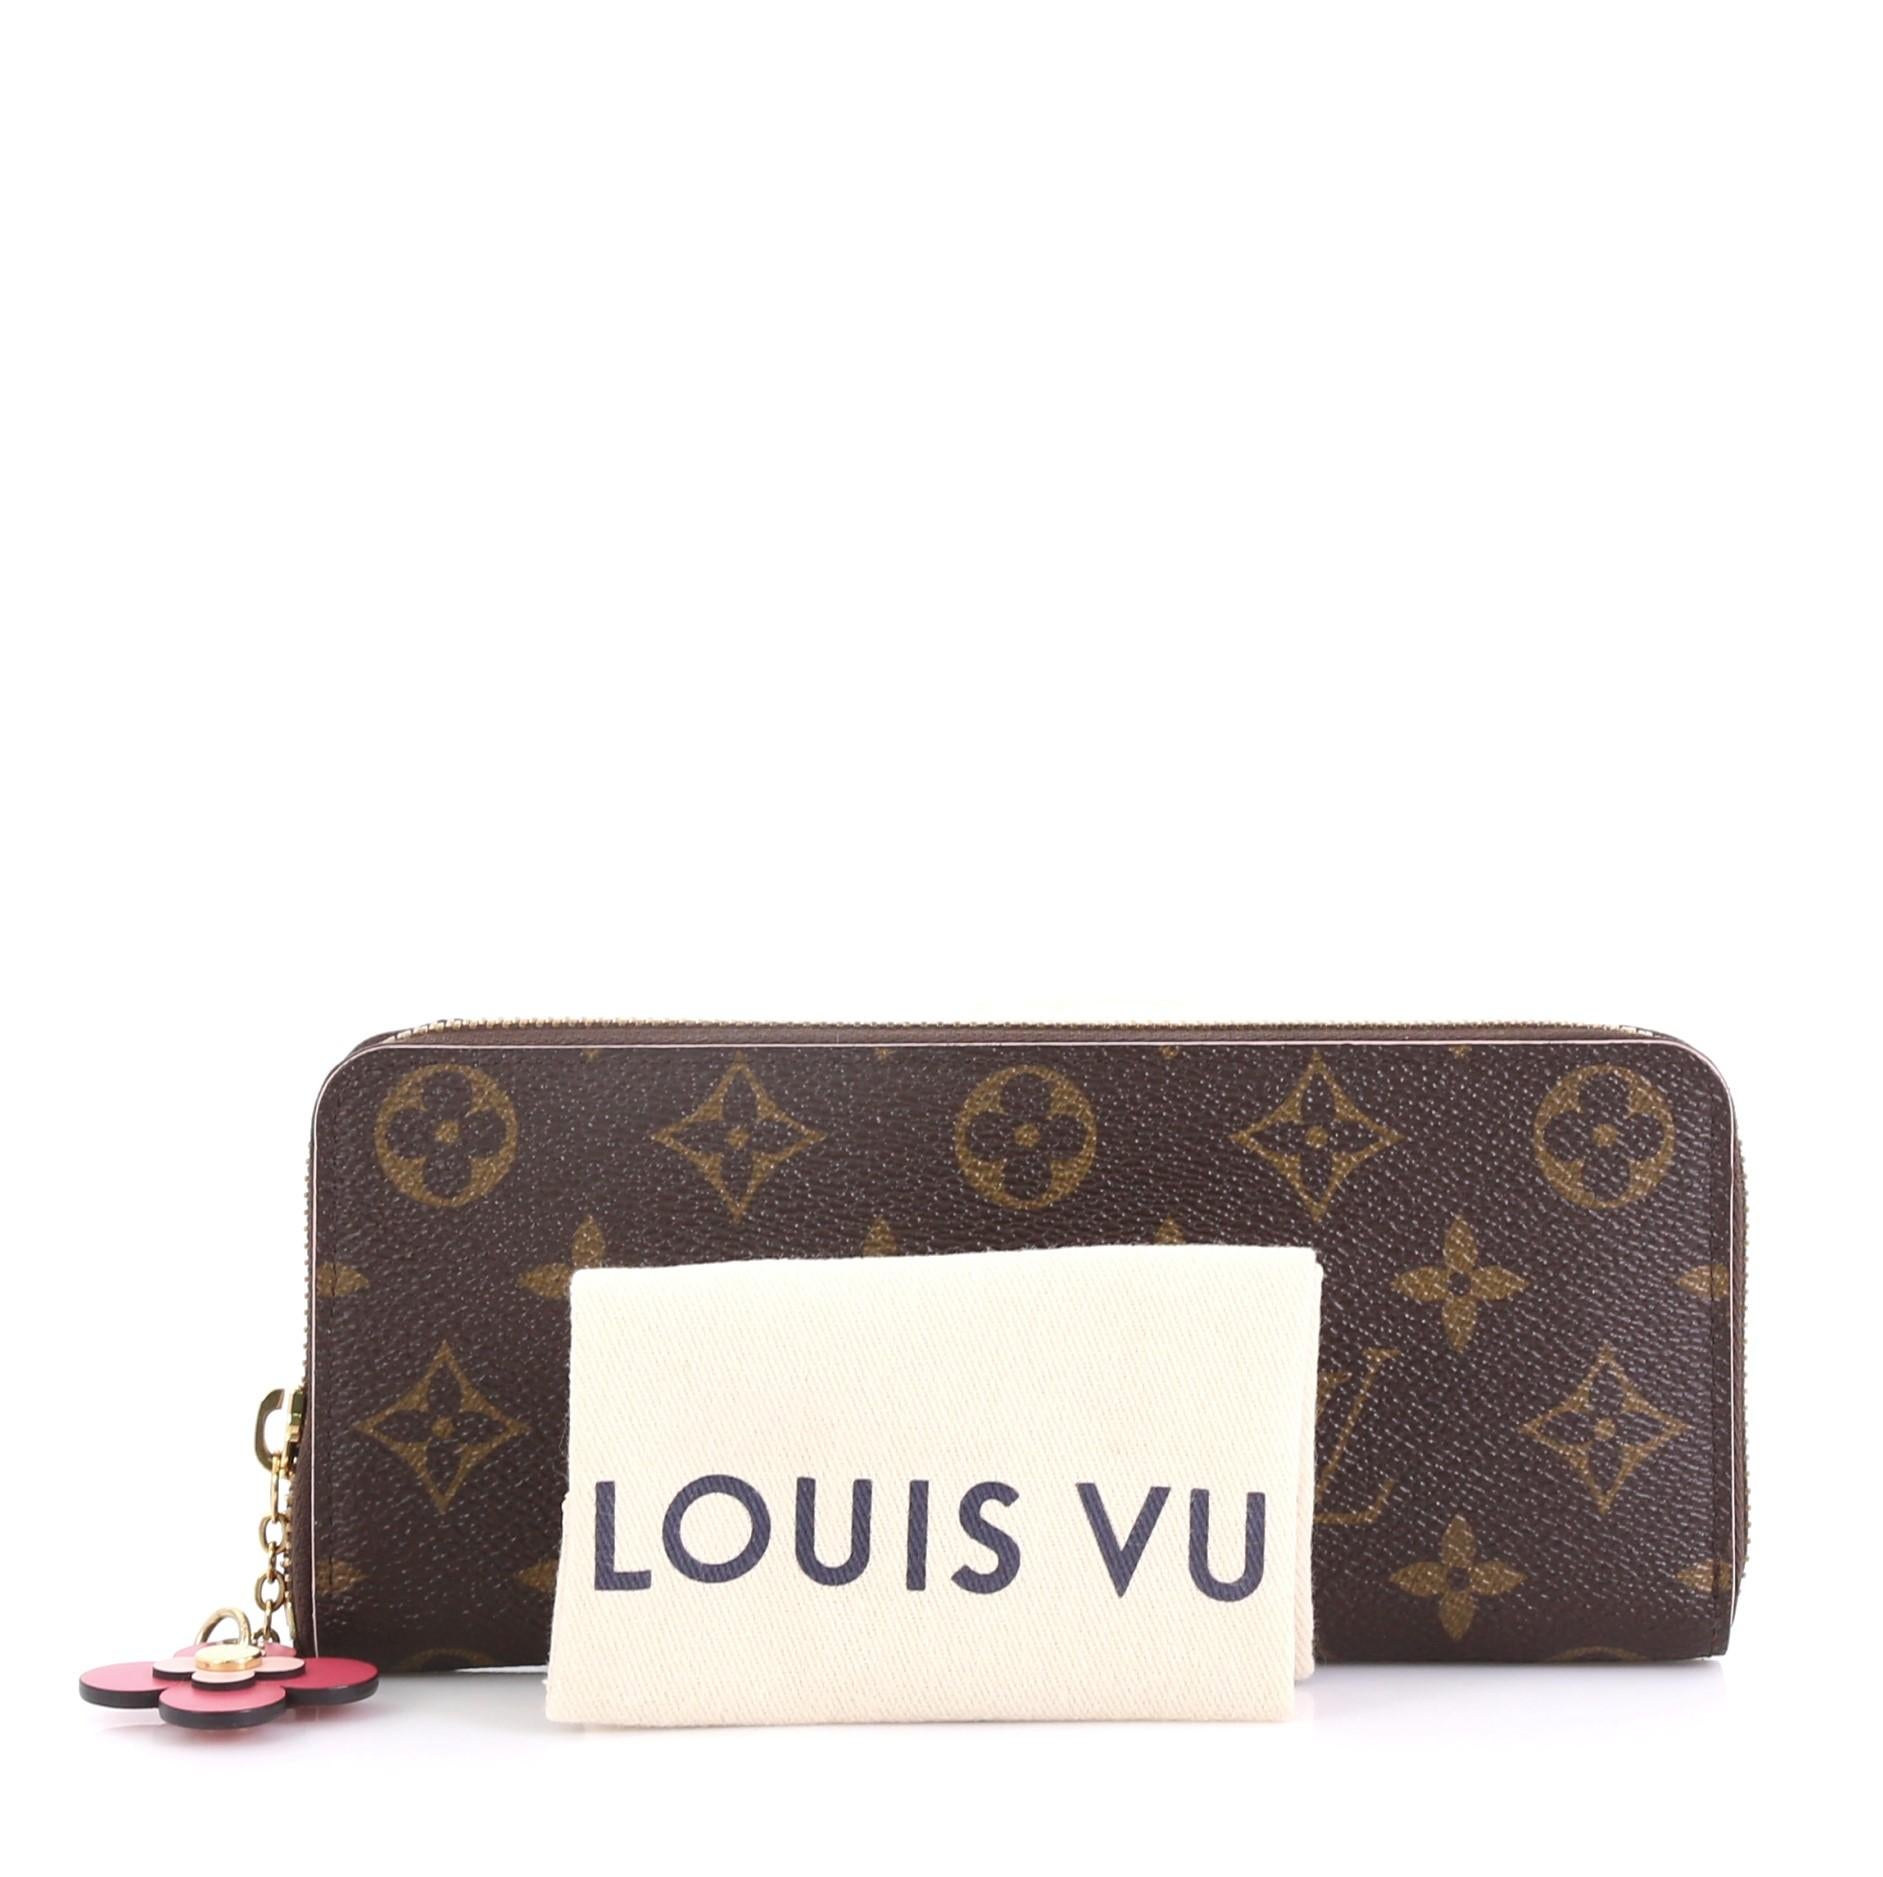 This Louis Vuitton Clemence Wallet Limited Edition Bloom Flower Monogram Canvas, crafted from brown monogram coated canvas, features gold-tone hardware. Its all-around zip closure opens to a pink leather interior with multiple card slots, two slip